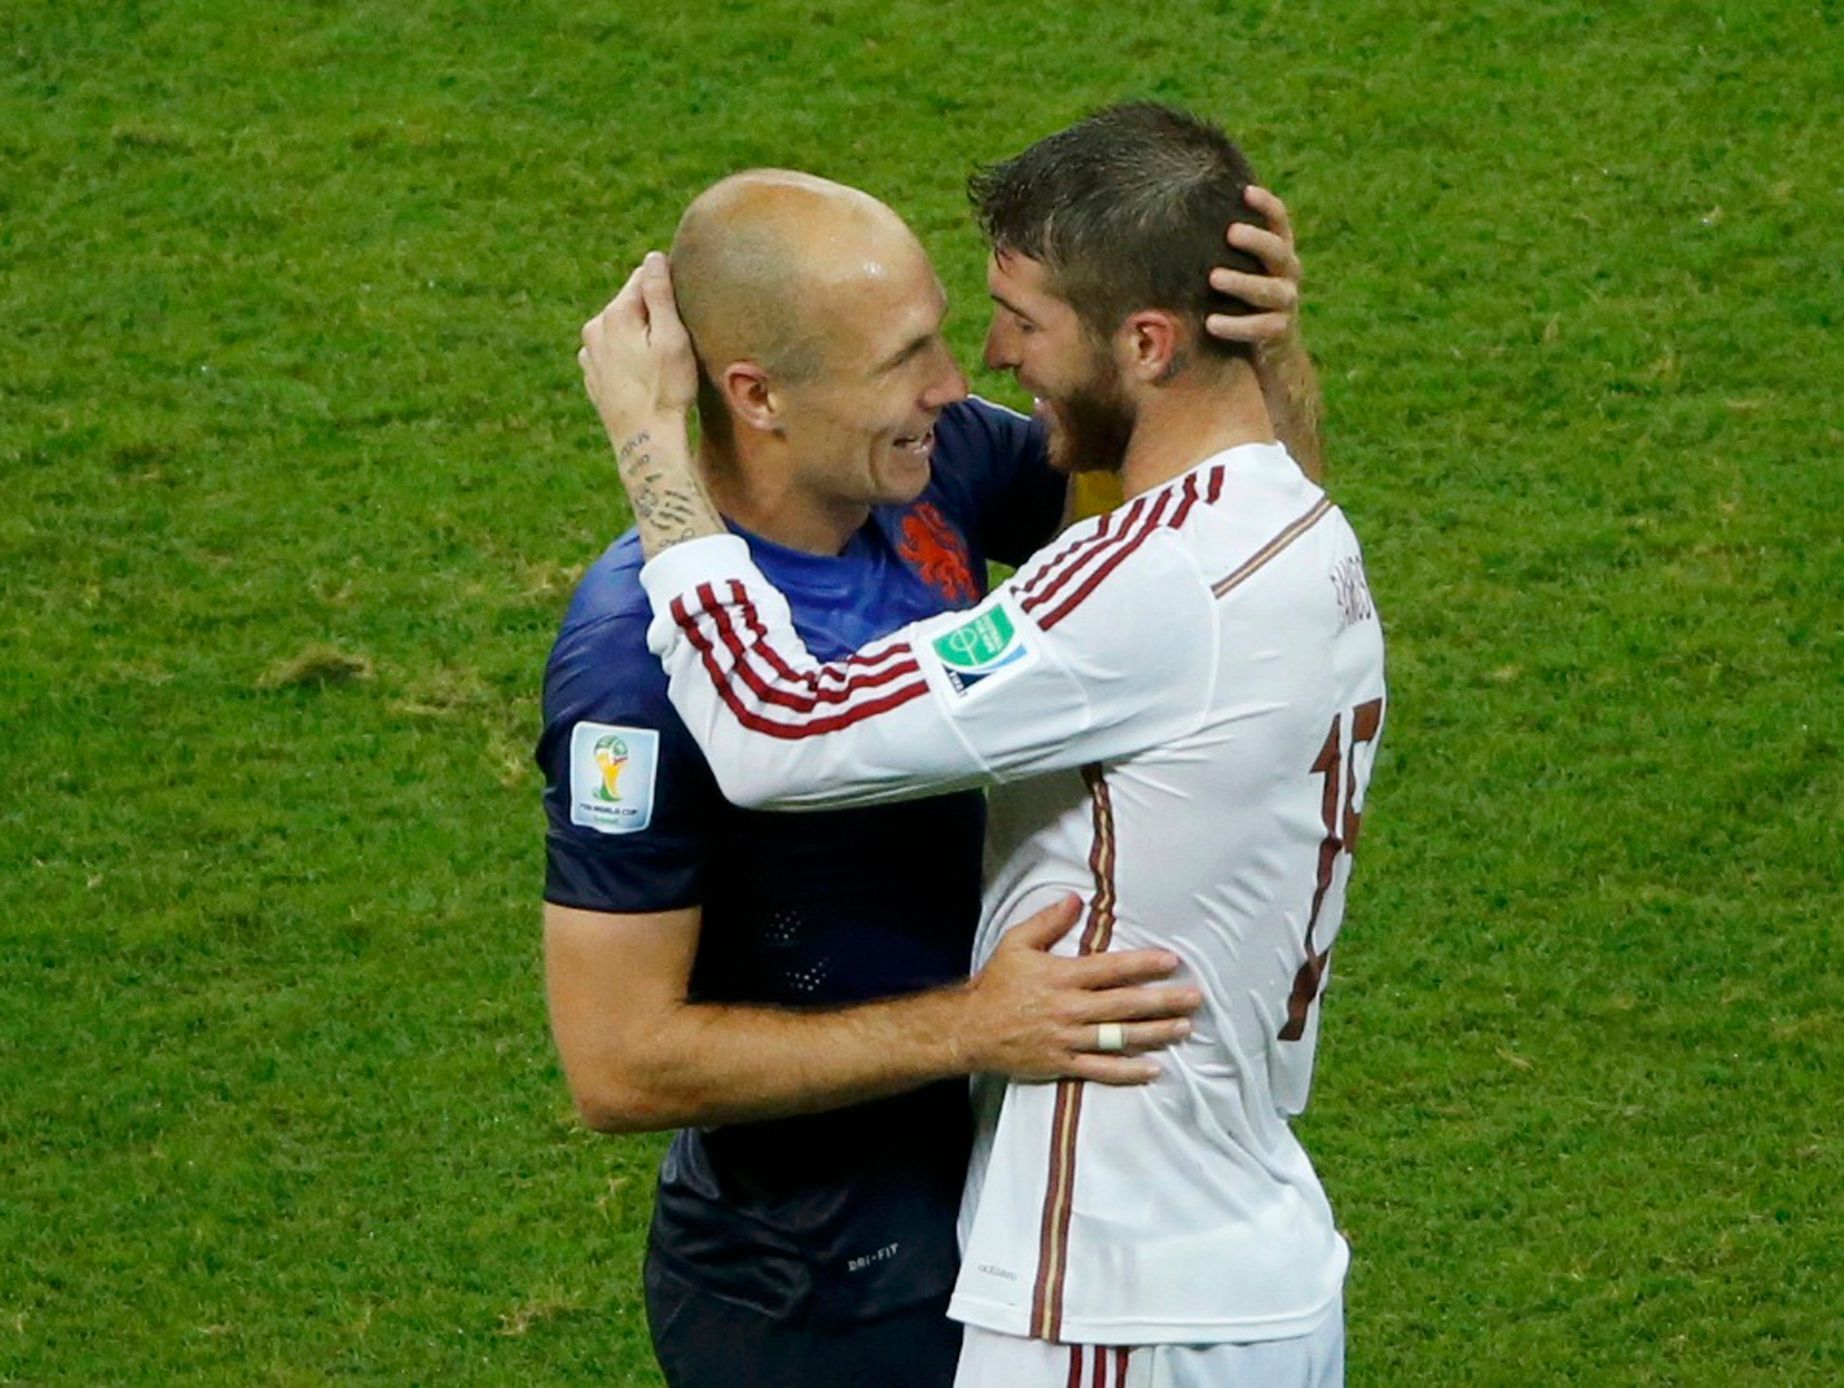 Spain's Ramos congratulates Robben of the Netherlands after their victory in the 2014 World Cup Group B match at the Fonte Nova arena in Salvador